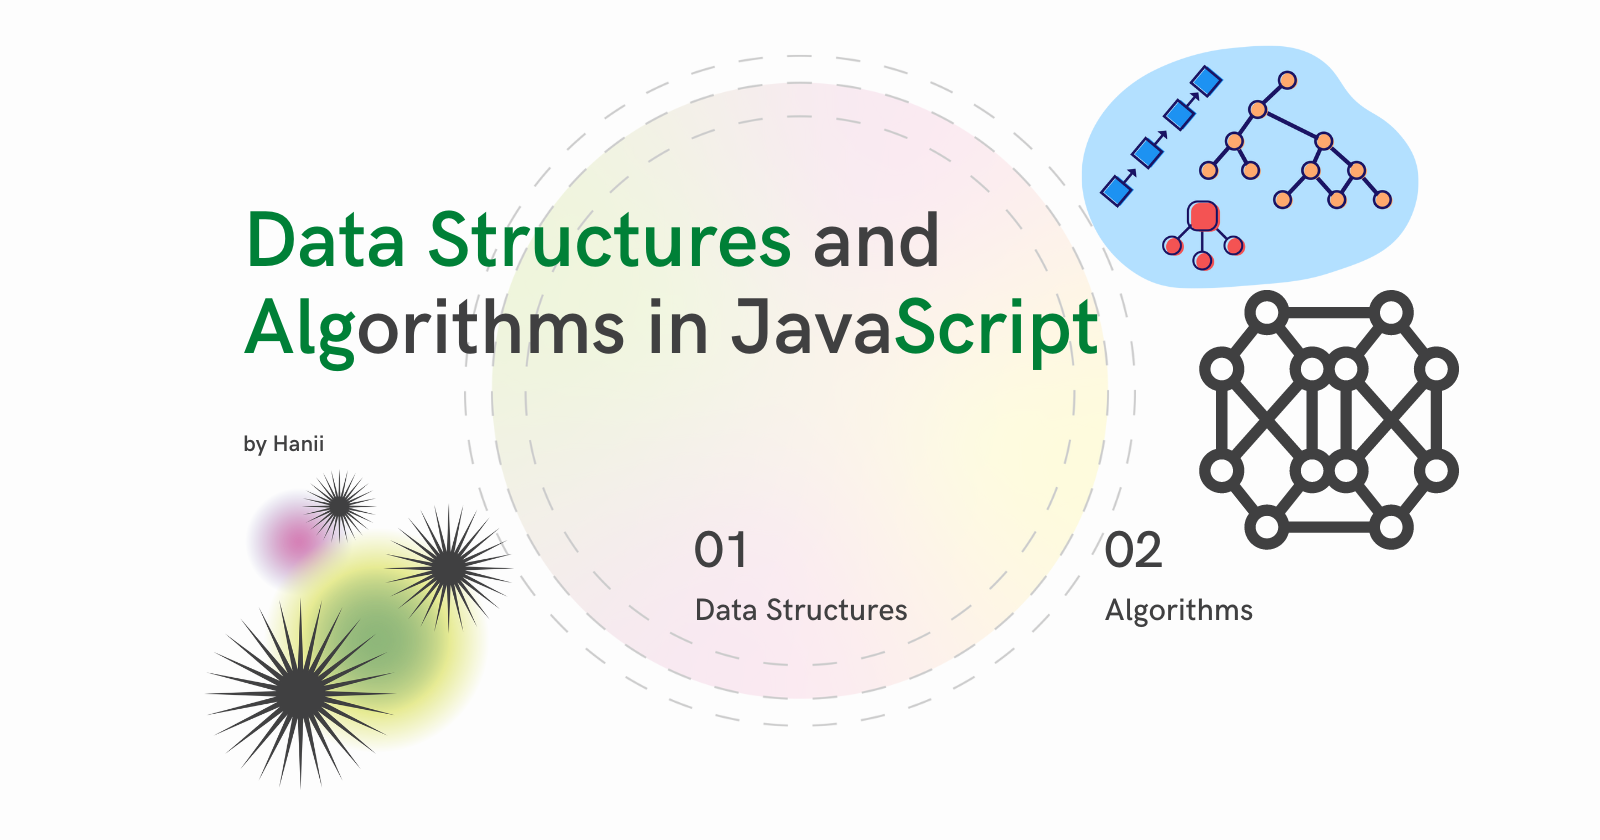 Data Structures and Algorithms in JavaScript